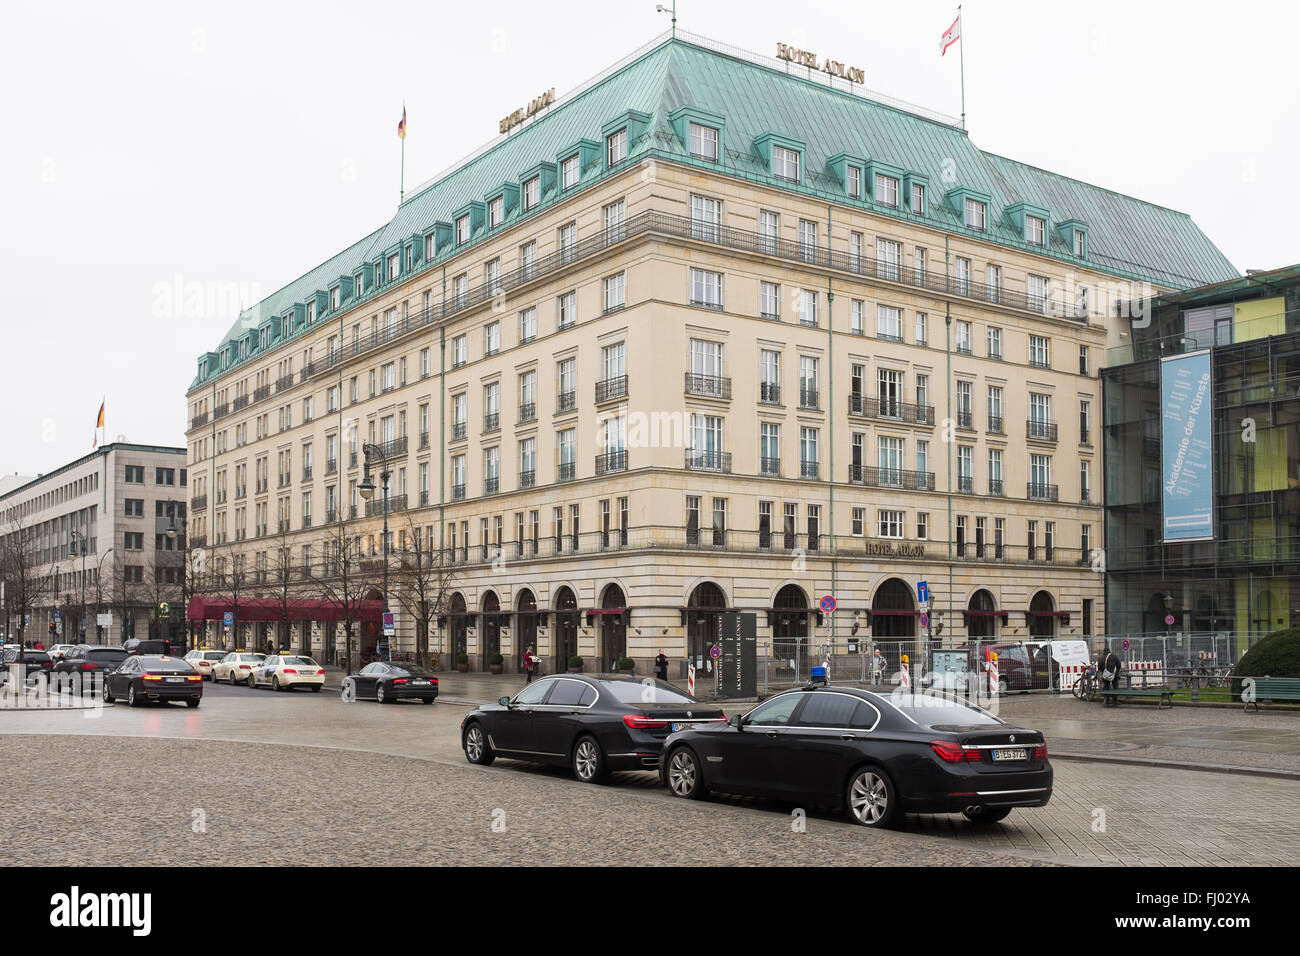 BERLIN, FEBRUARY 26: The Adlon Hotel and german official vehicles in the Brandenburger Tor in Berlin Mitte on February 26, 2016. Stock Photo